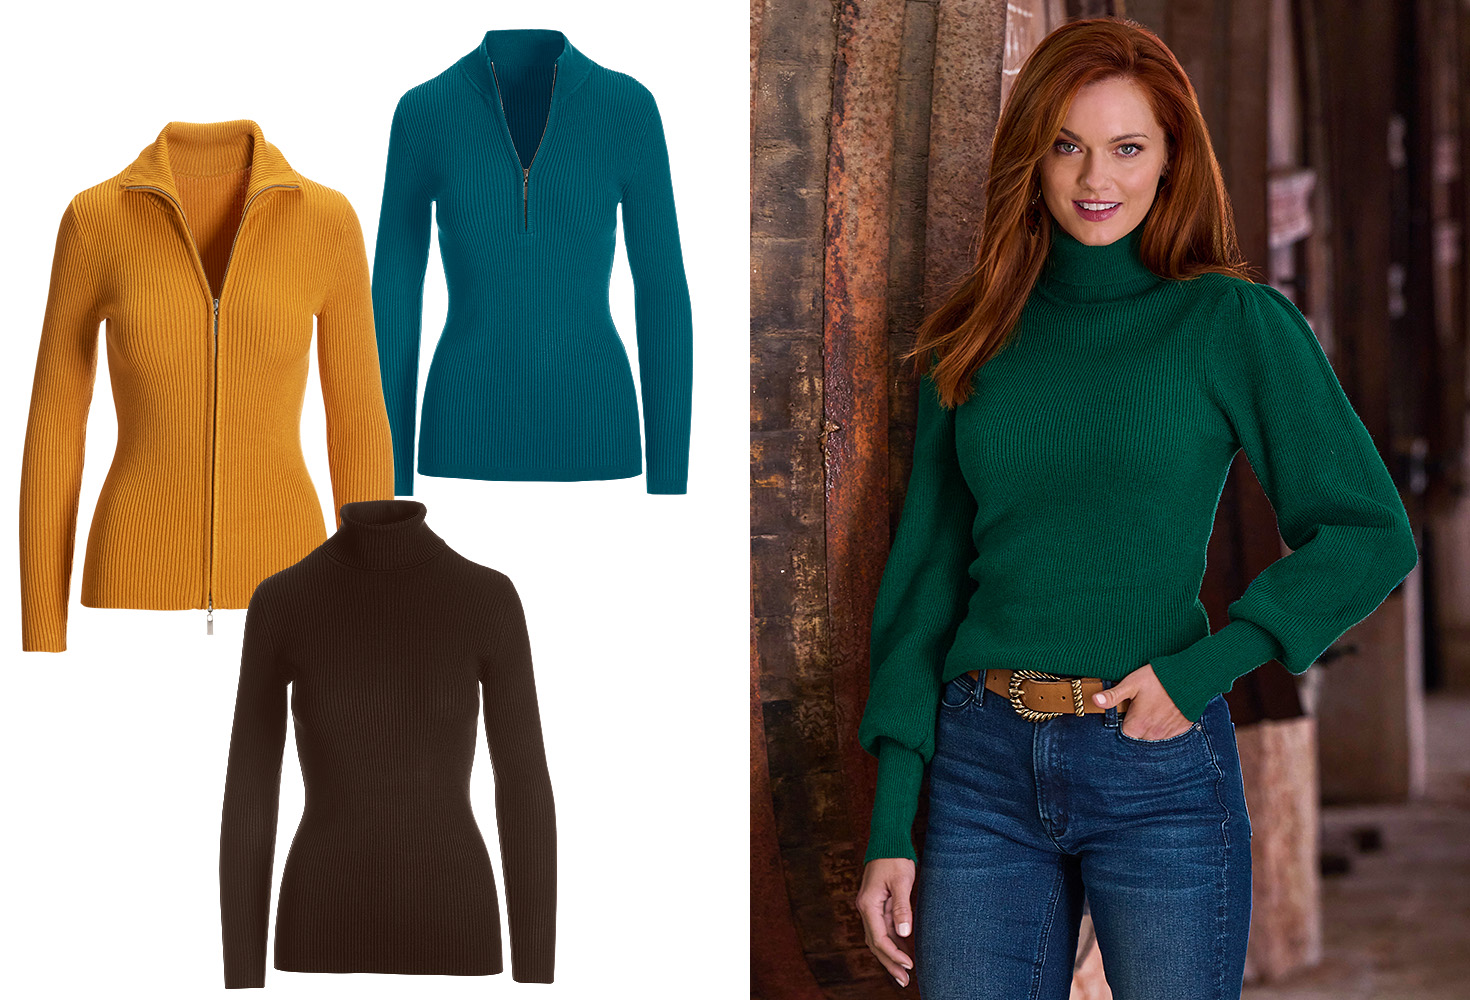 left panel shows a dark yellow ribbed full-zip cardigan, teal half zip ribbed cardigan, and dark brown ribbed turtleneck sweater. right model wearing a deep green puff-sleeve ribbed cashmere turtleneck sweater, brown belt, and jeans.